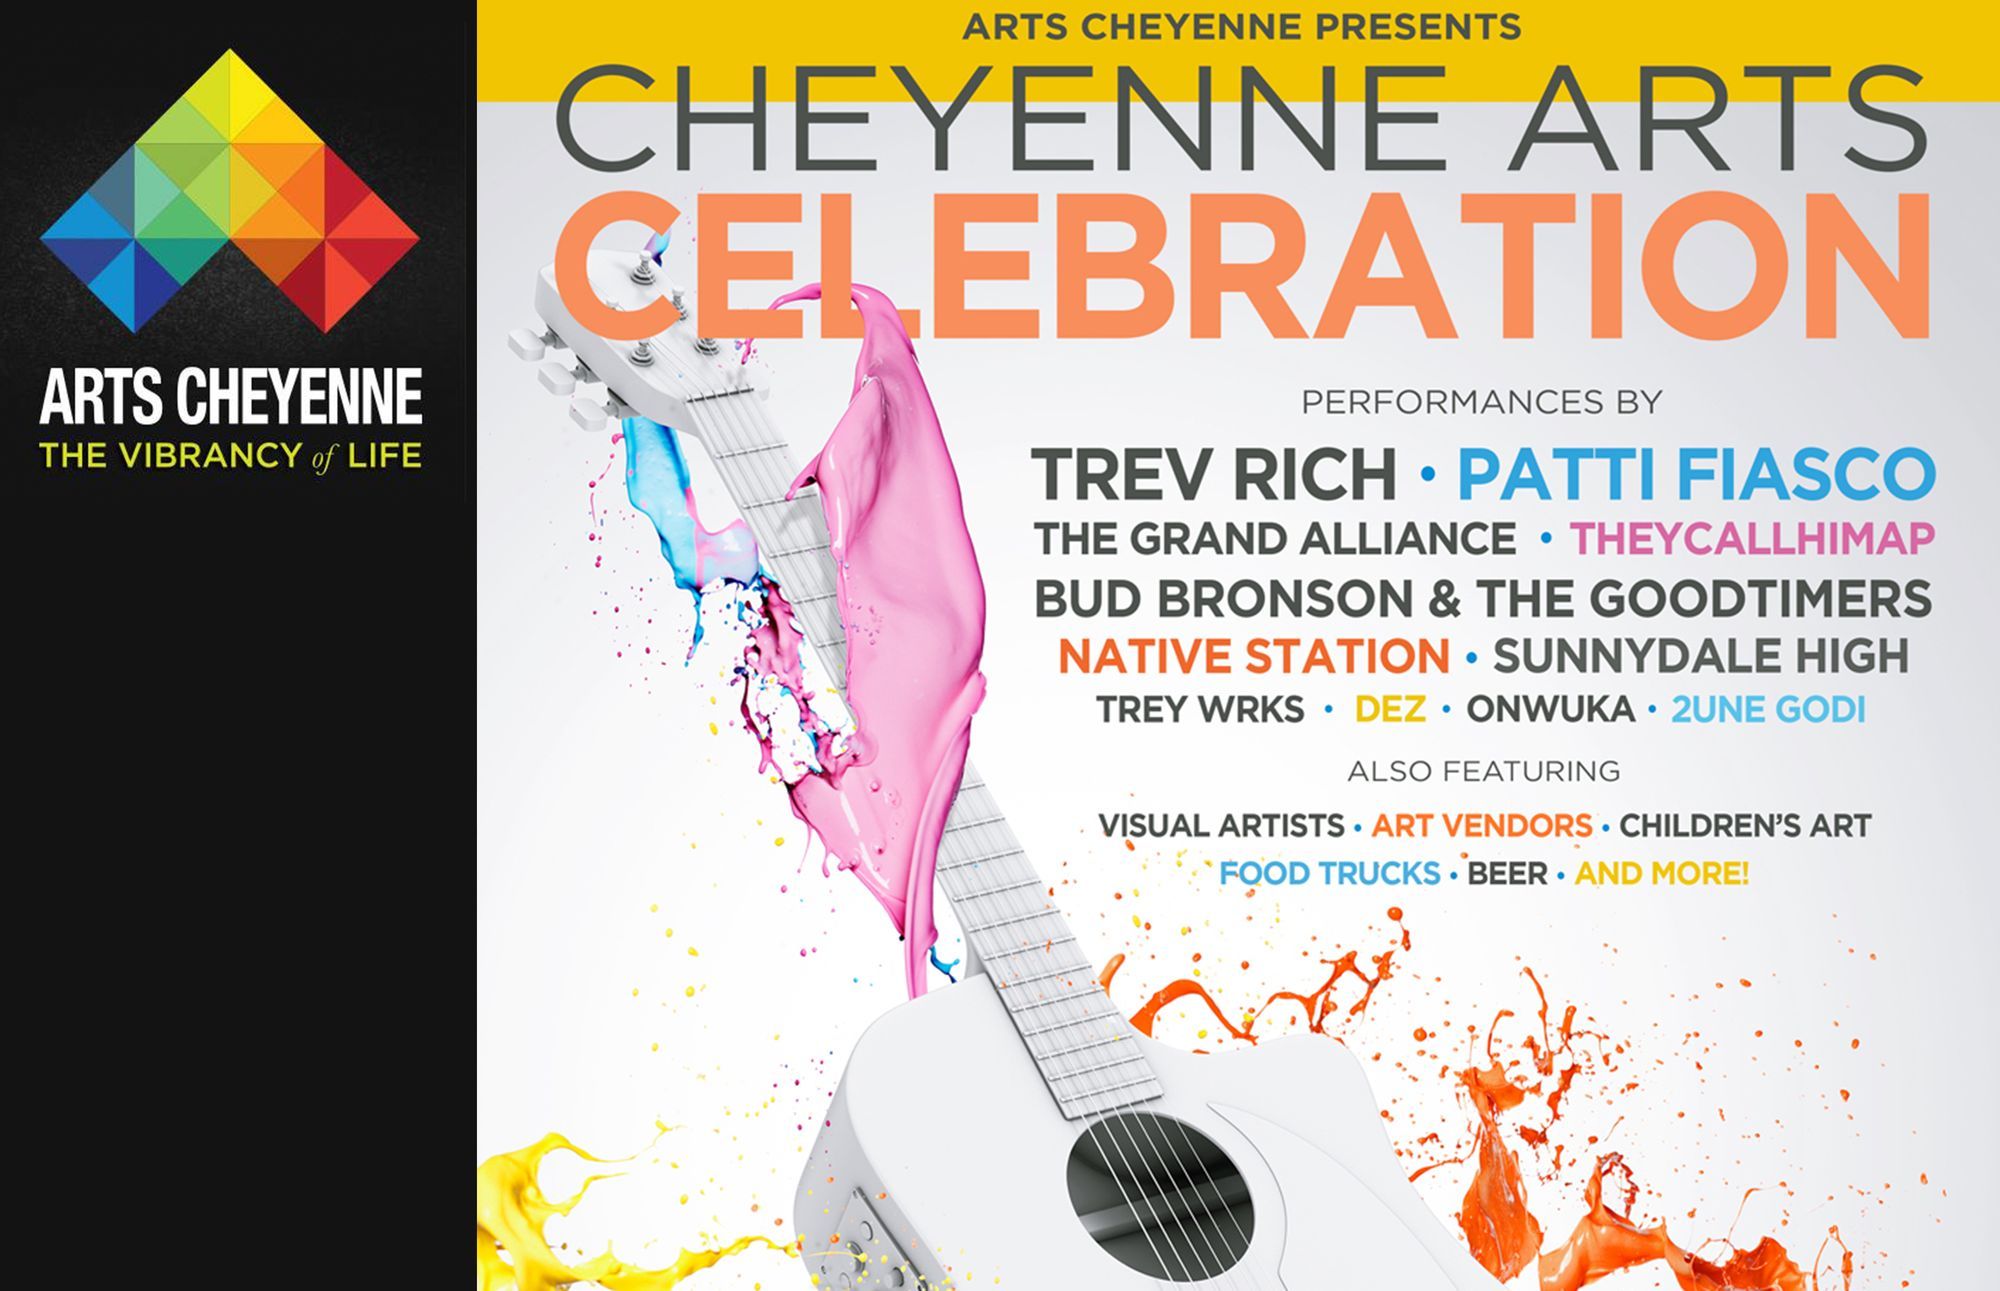 Fun and Free - Cheyenne Arts Celebration Is This Saturday